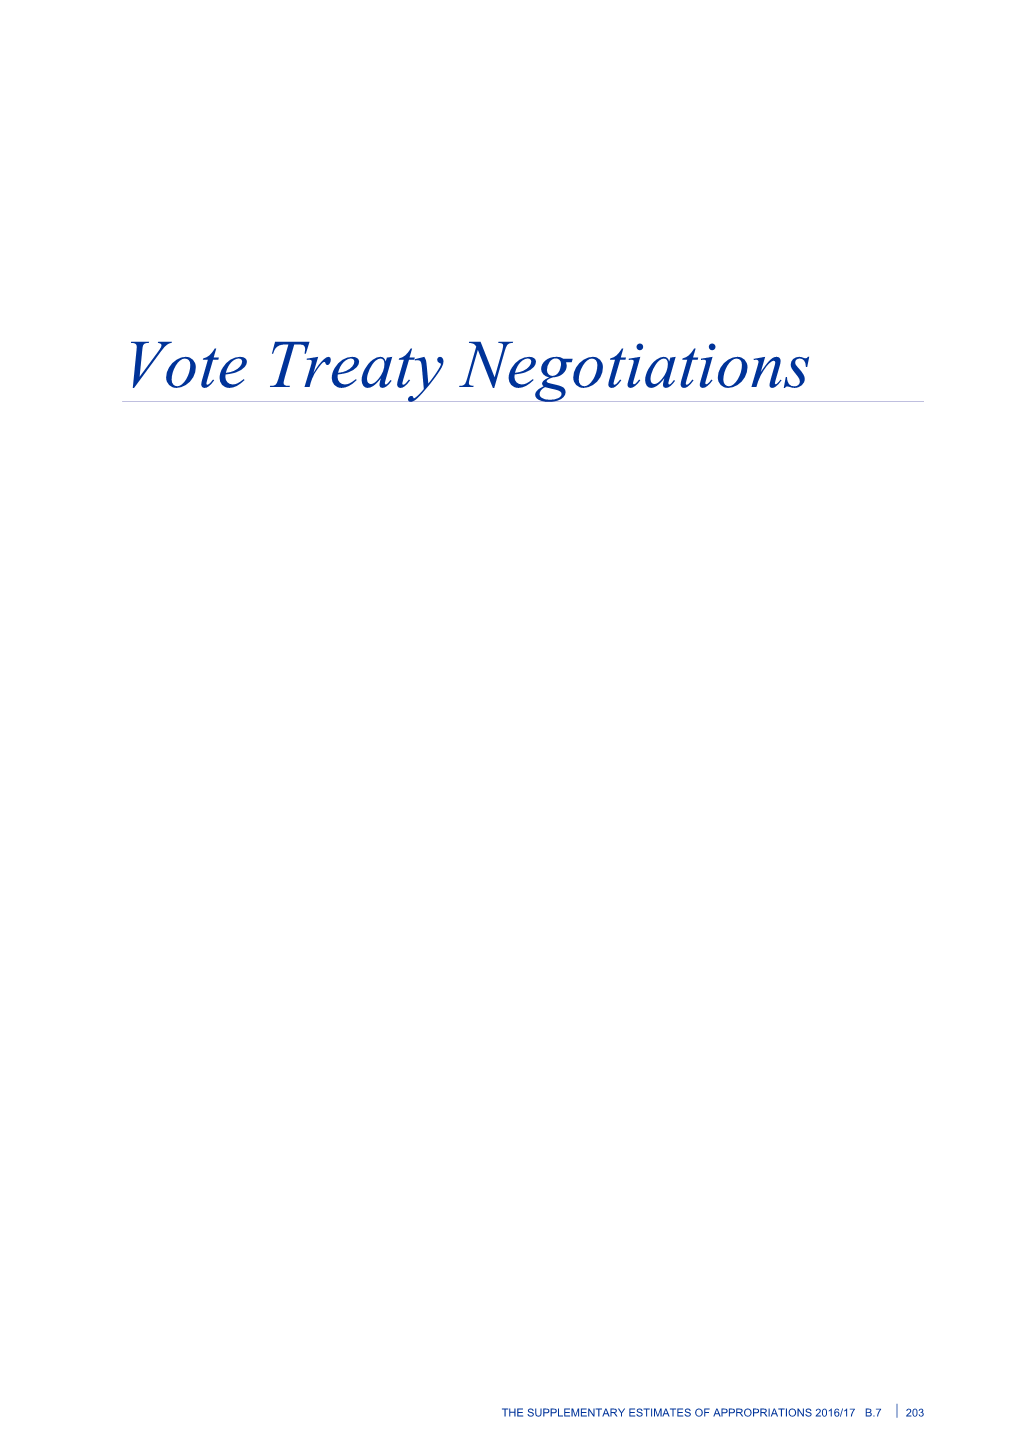 Vote Treaty Negotiations - Supplementary Estimates Of Appropriations 2016/17 - Budget 2017